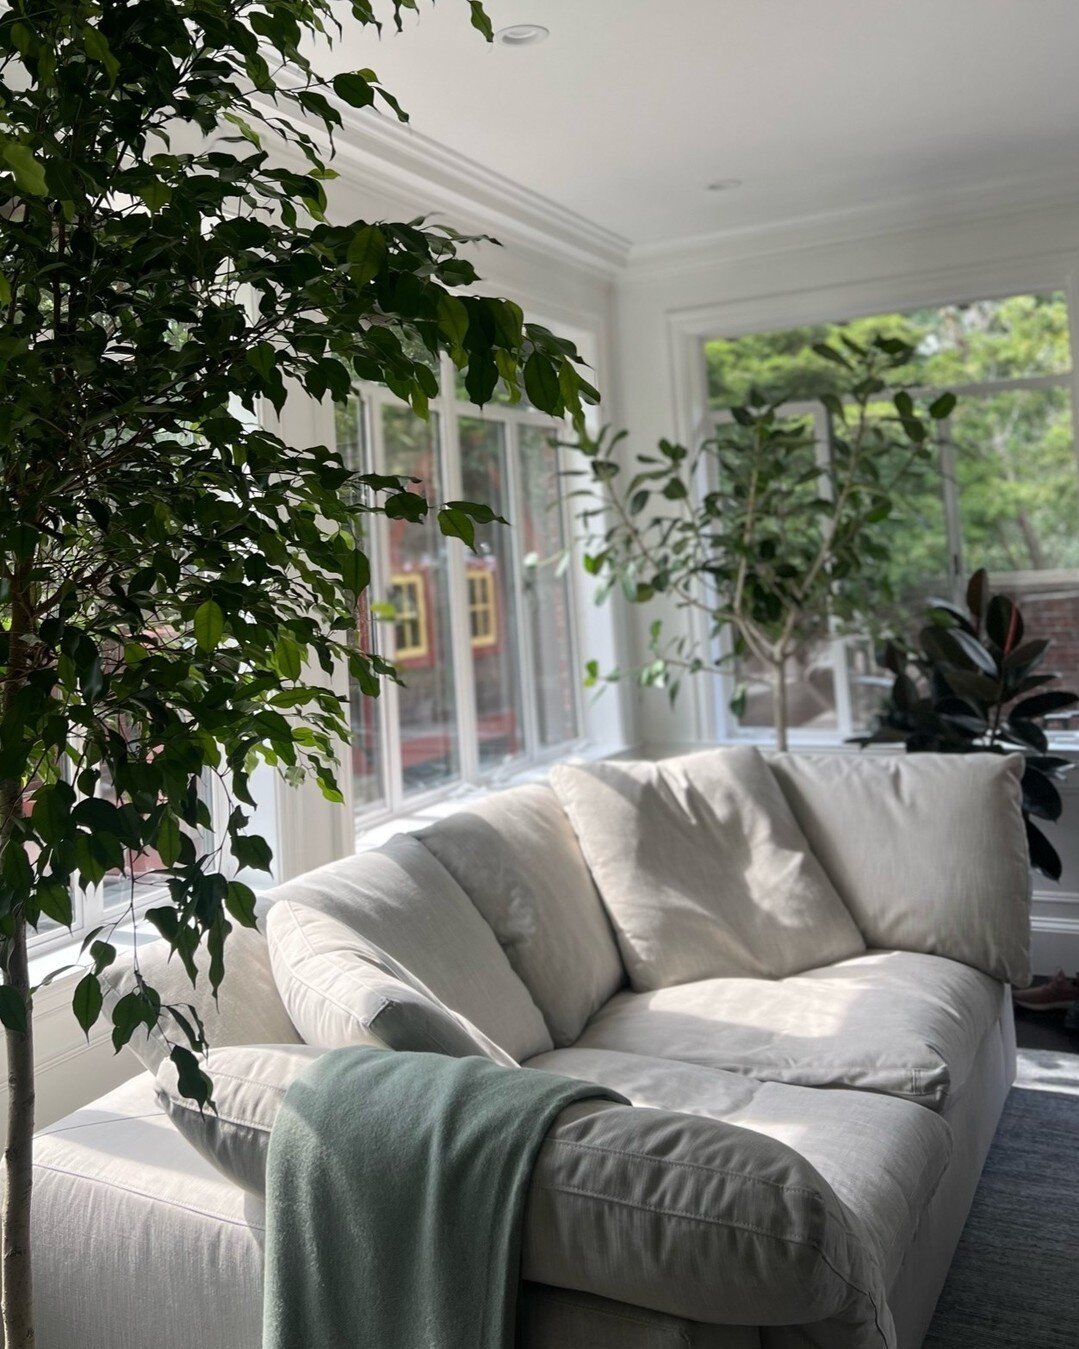 Can you even imagine a cozier spot to read or sip your morning coffee?⁠
These textured Ficus trees create such a special atmosphere in this sun room. ⁠This wonderful client receives a weekly maintenance visit from our amazing Plant Care Specialist to